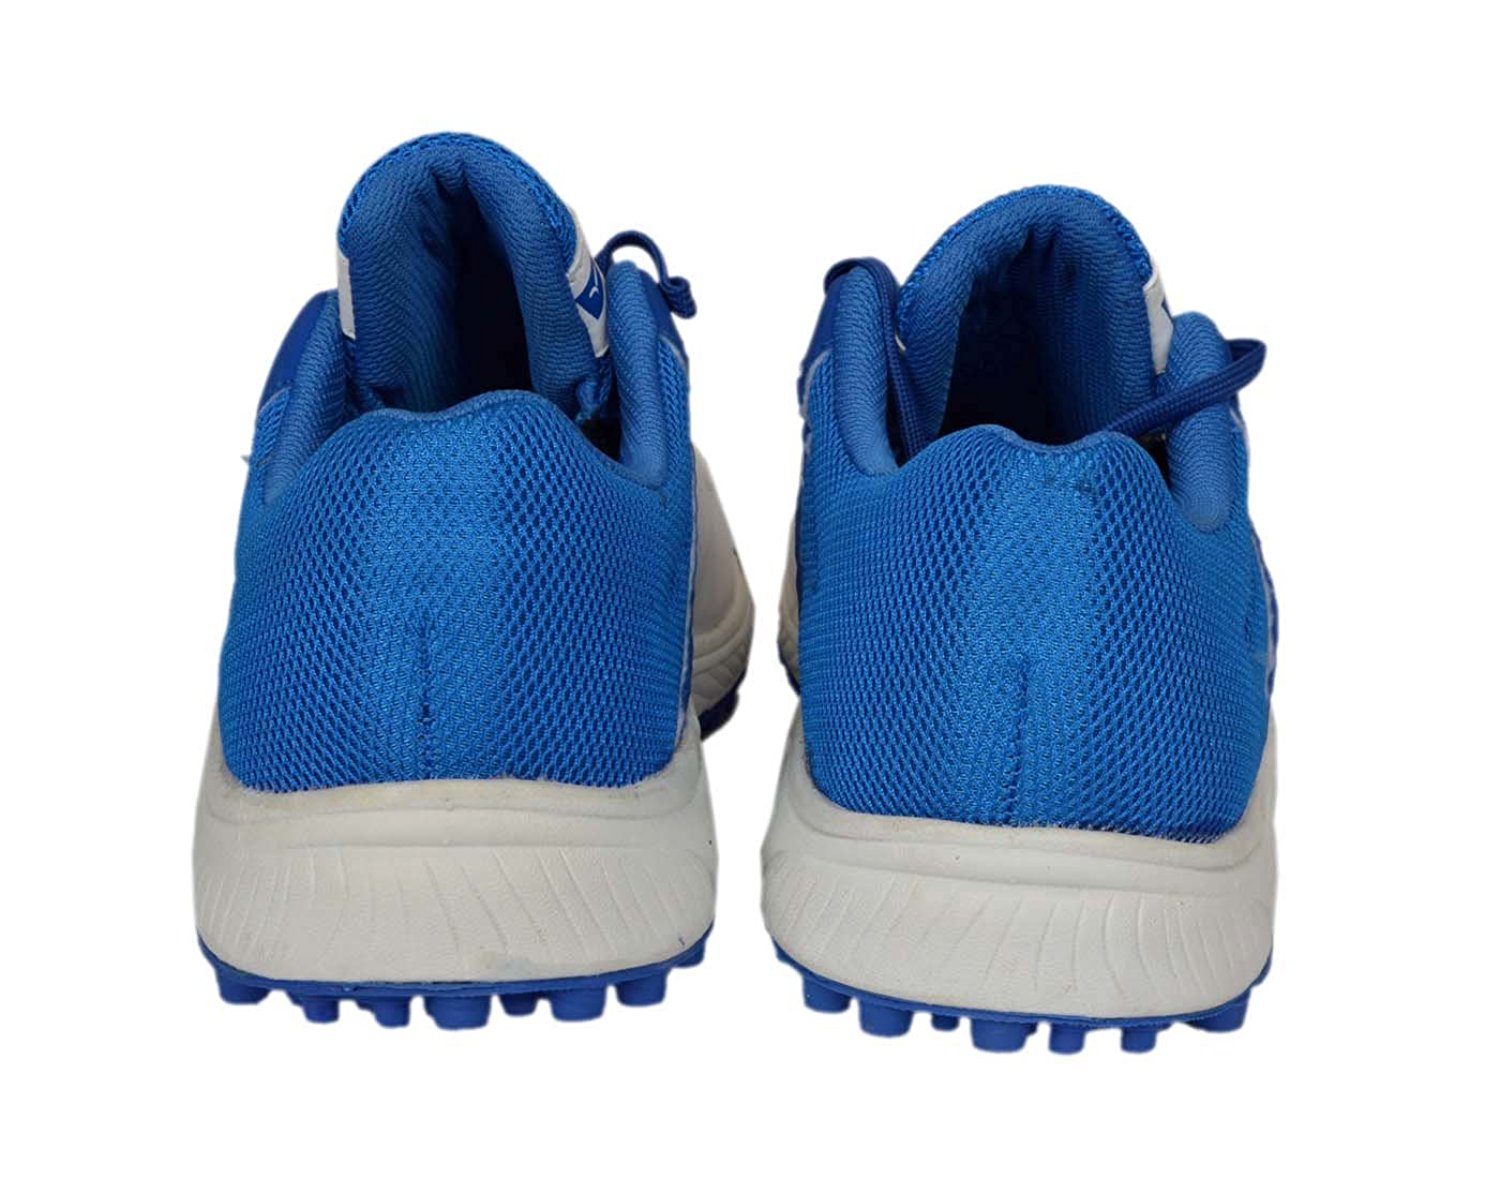 Buy SEGA Booster Rubber Stud Cricket Shoes. Online @ ₹998 from ShopClues